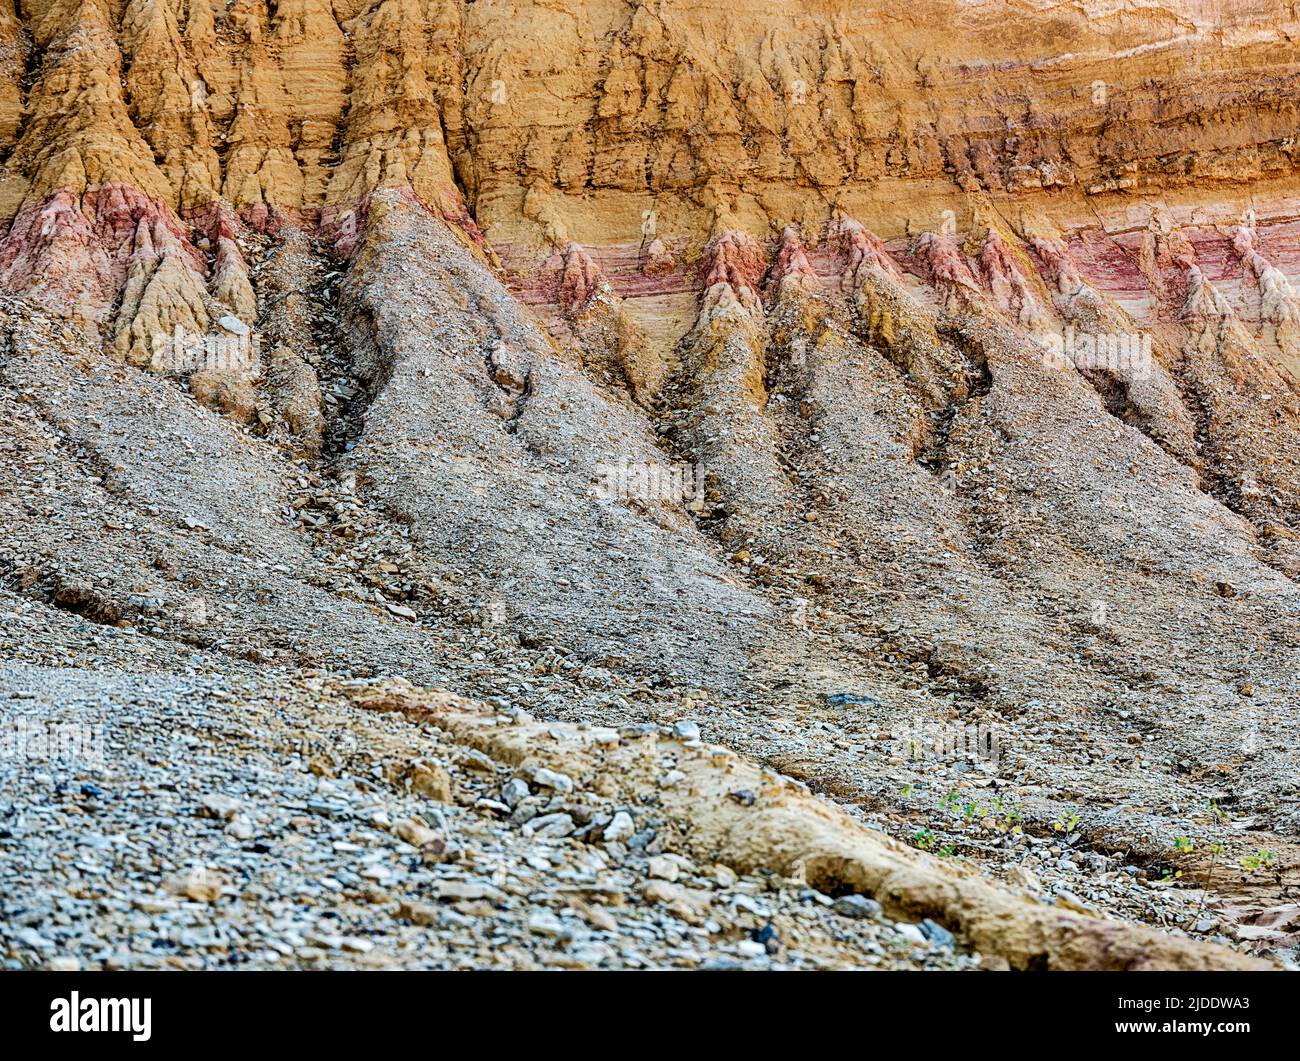 Gravel runoff collects at the bottom of the cliffs in the Rustrel Canyon. Stock Photo